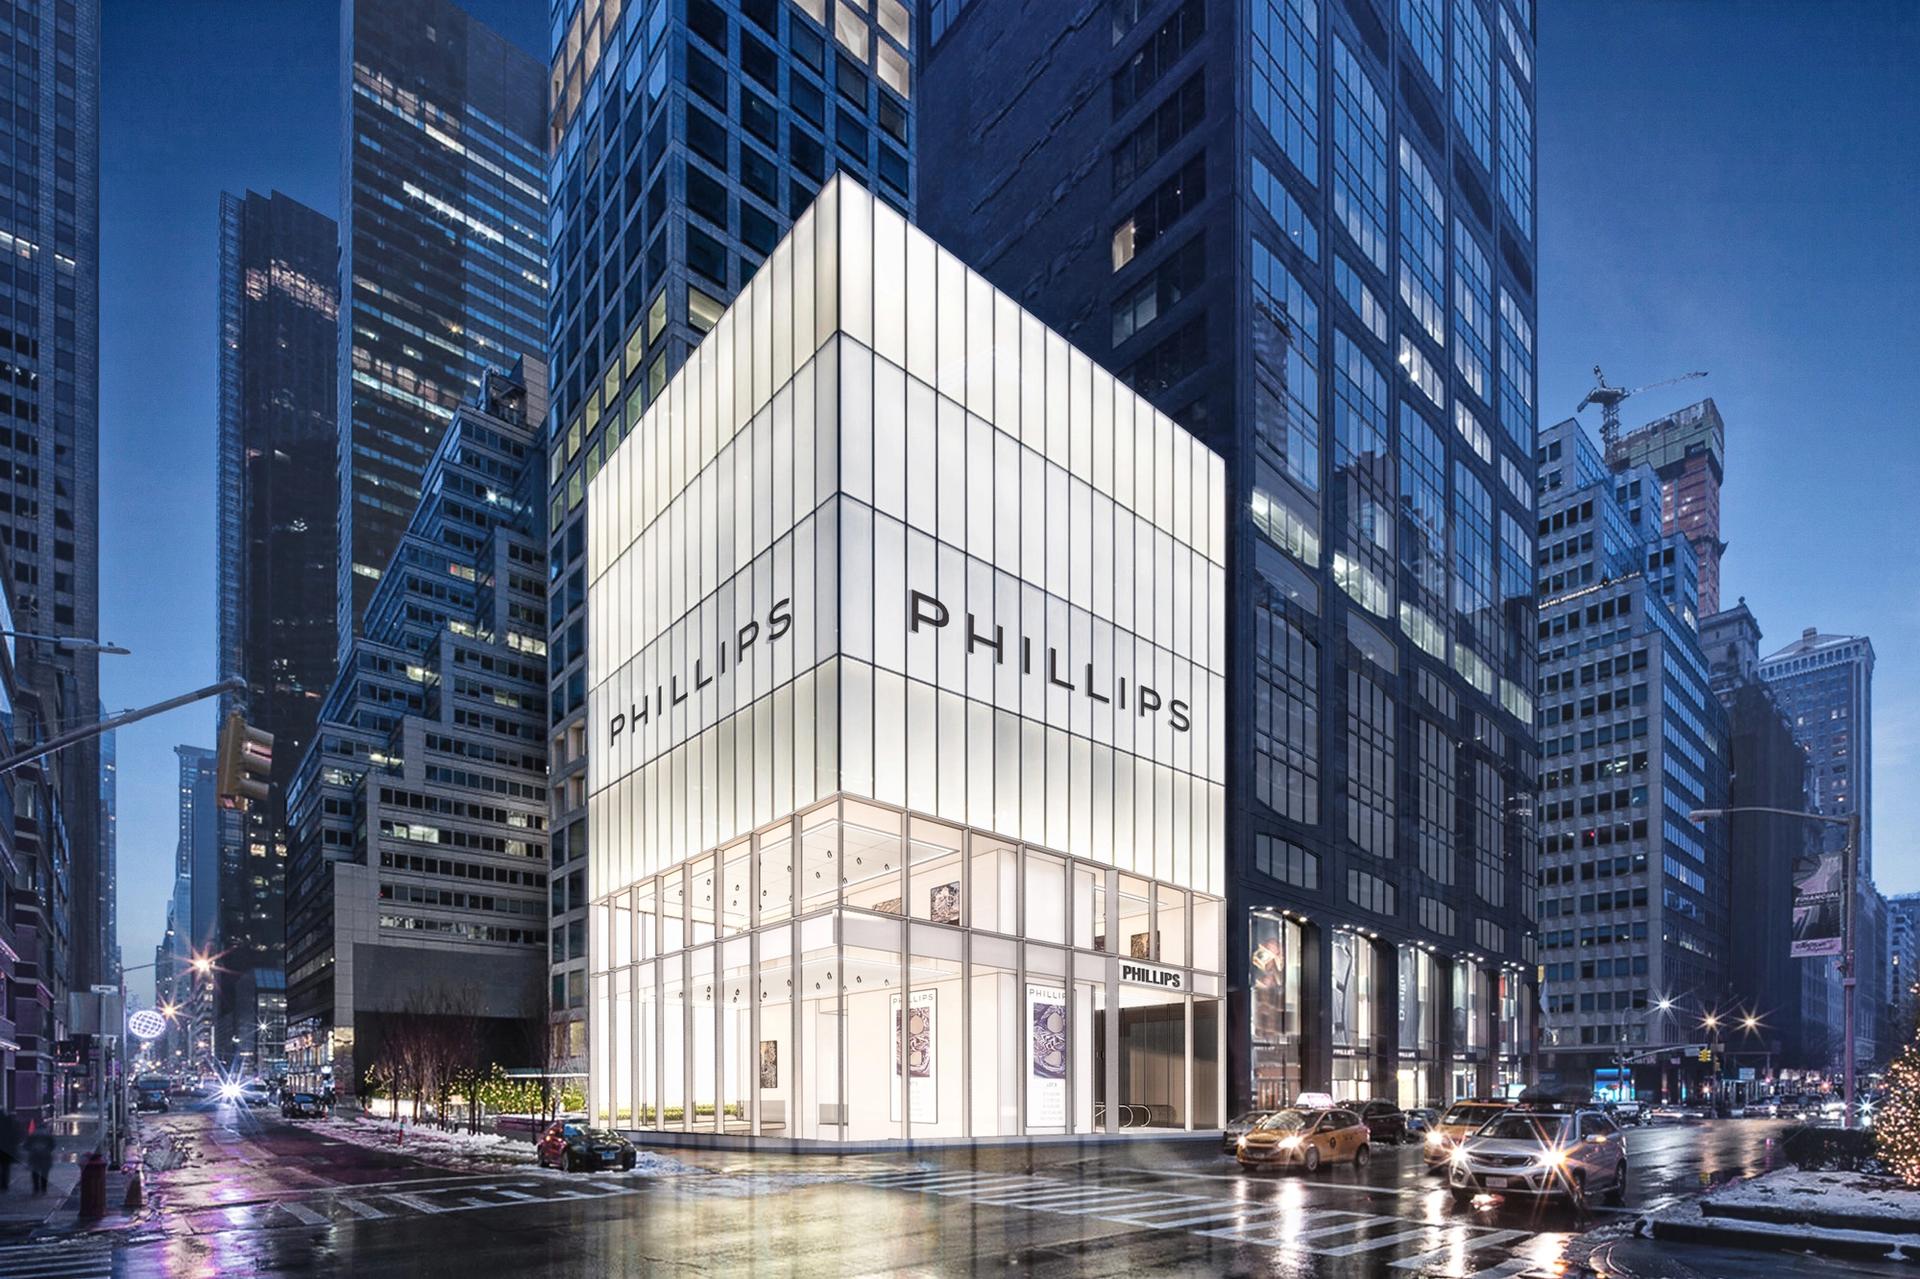 Phillips's new Manhattan headquarters at 450 Park Avenue, New York


Courtesy of Phillips